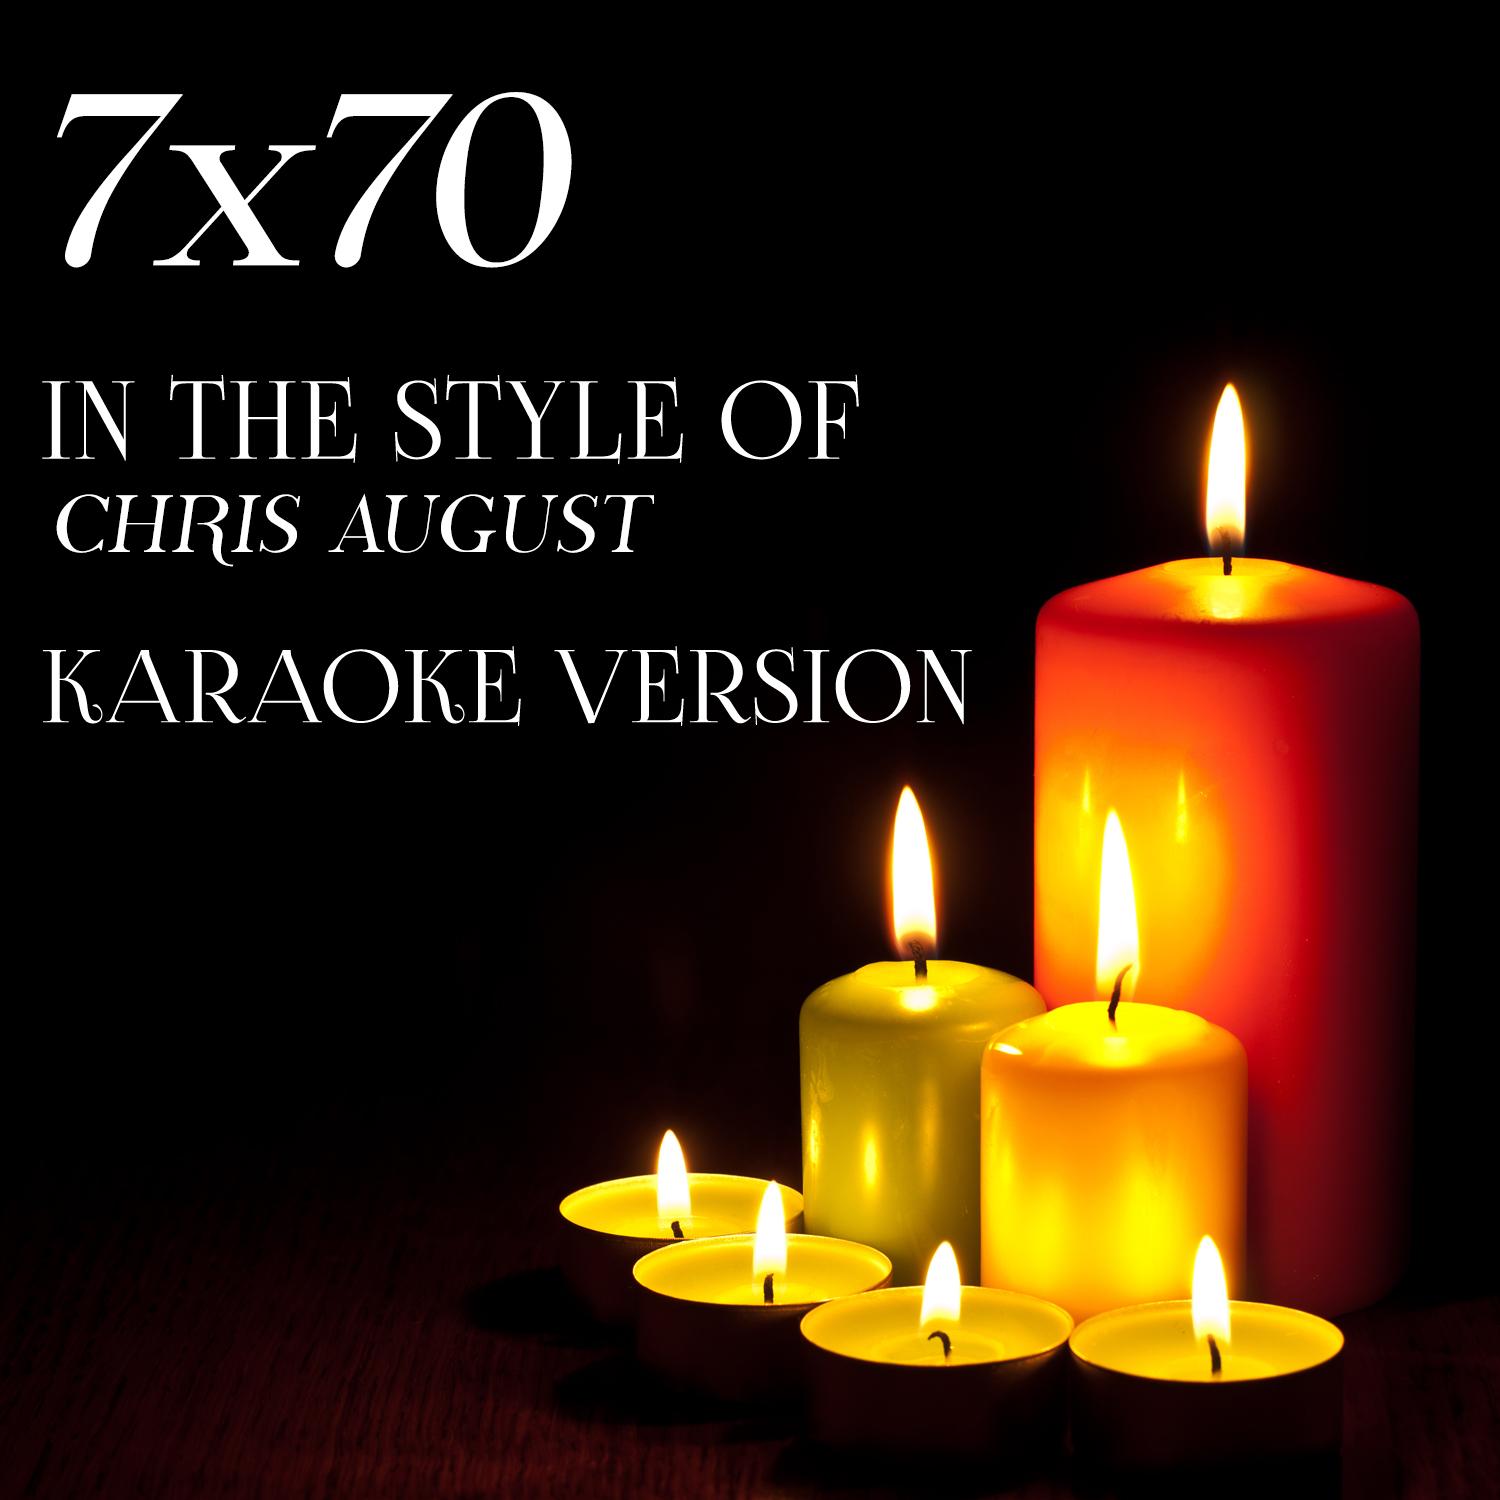 7x70 (In the Style of Chris August) [Karaoke Version]